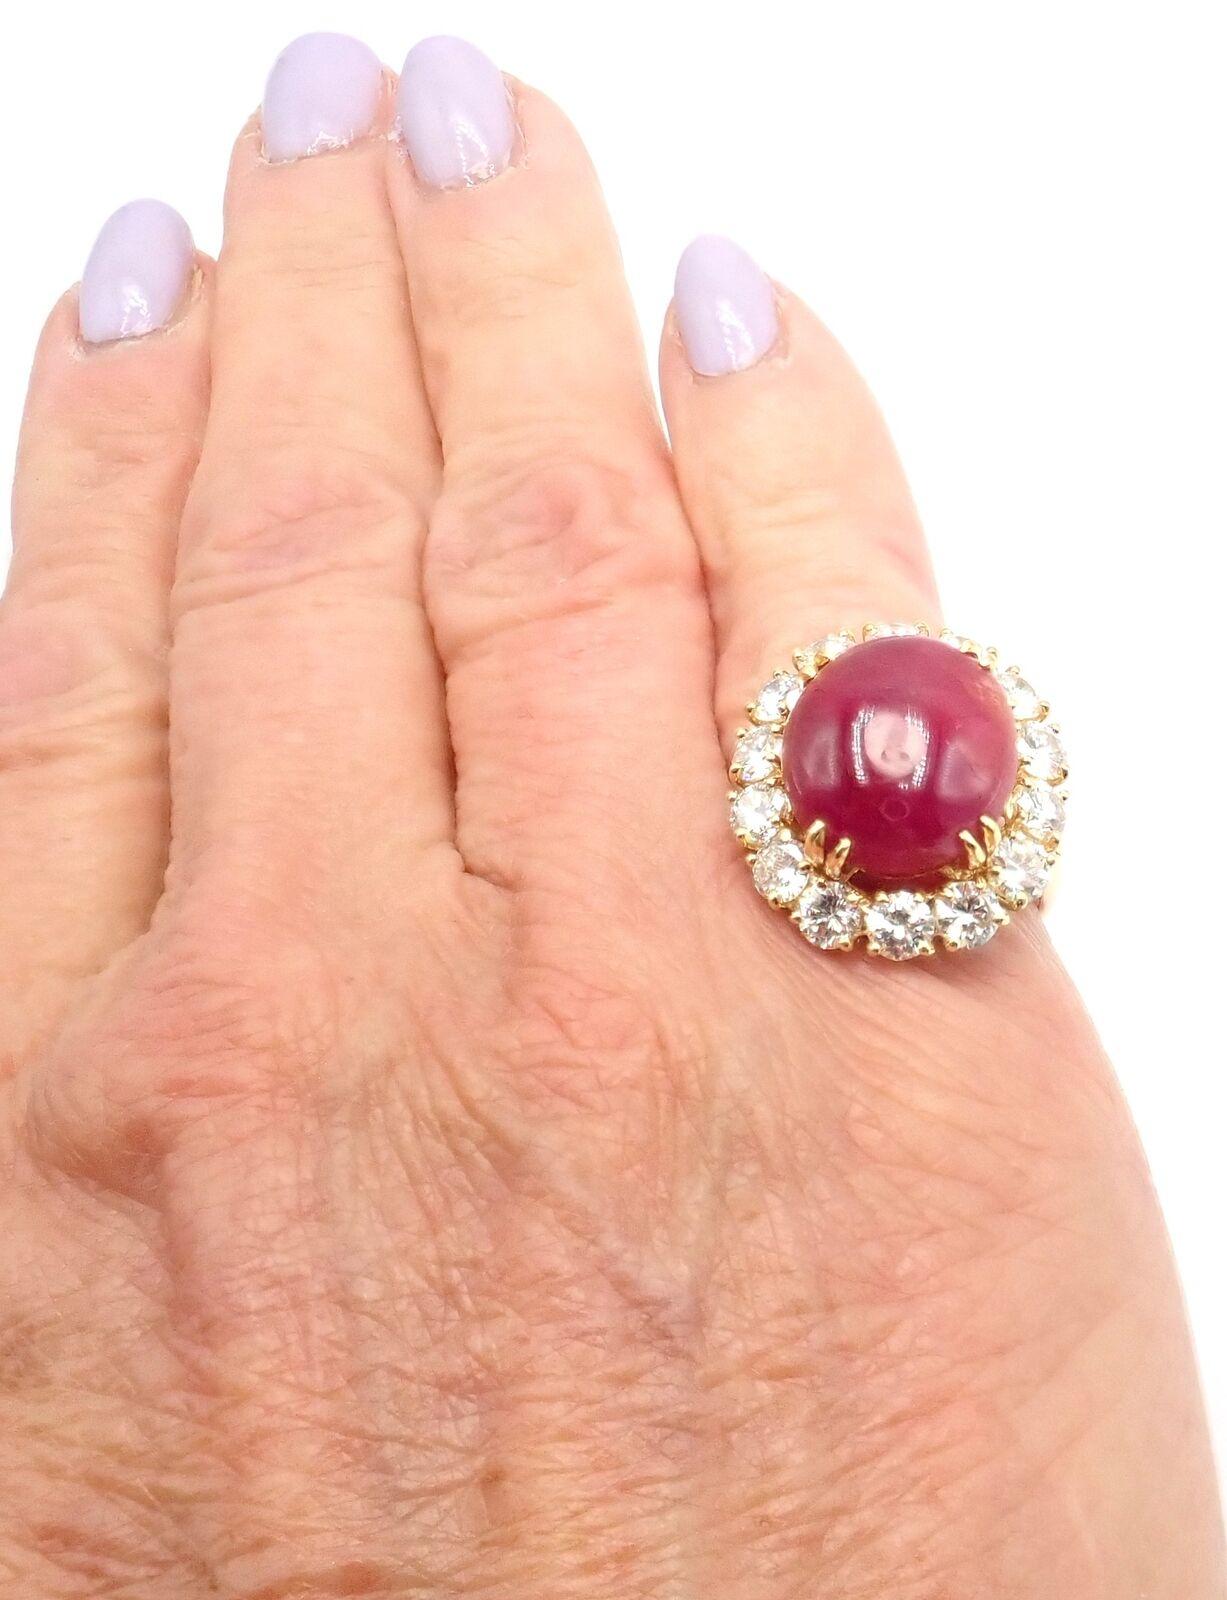 Van Cleef & Arpels Large Oval Cabochon Ruby Diamond Yellow Gold Ring In Excellent Condition For Sale In Holland, PA